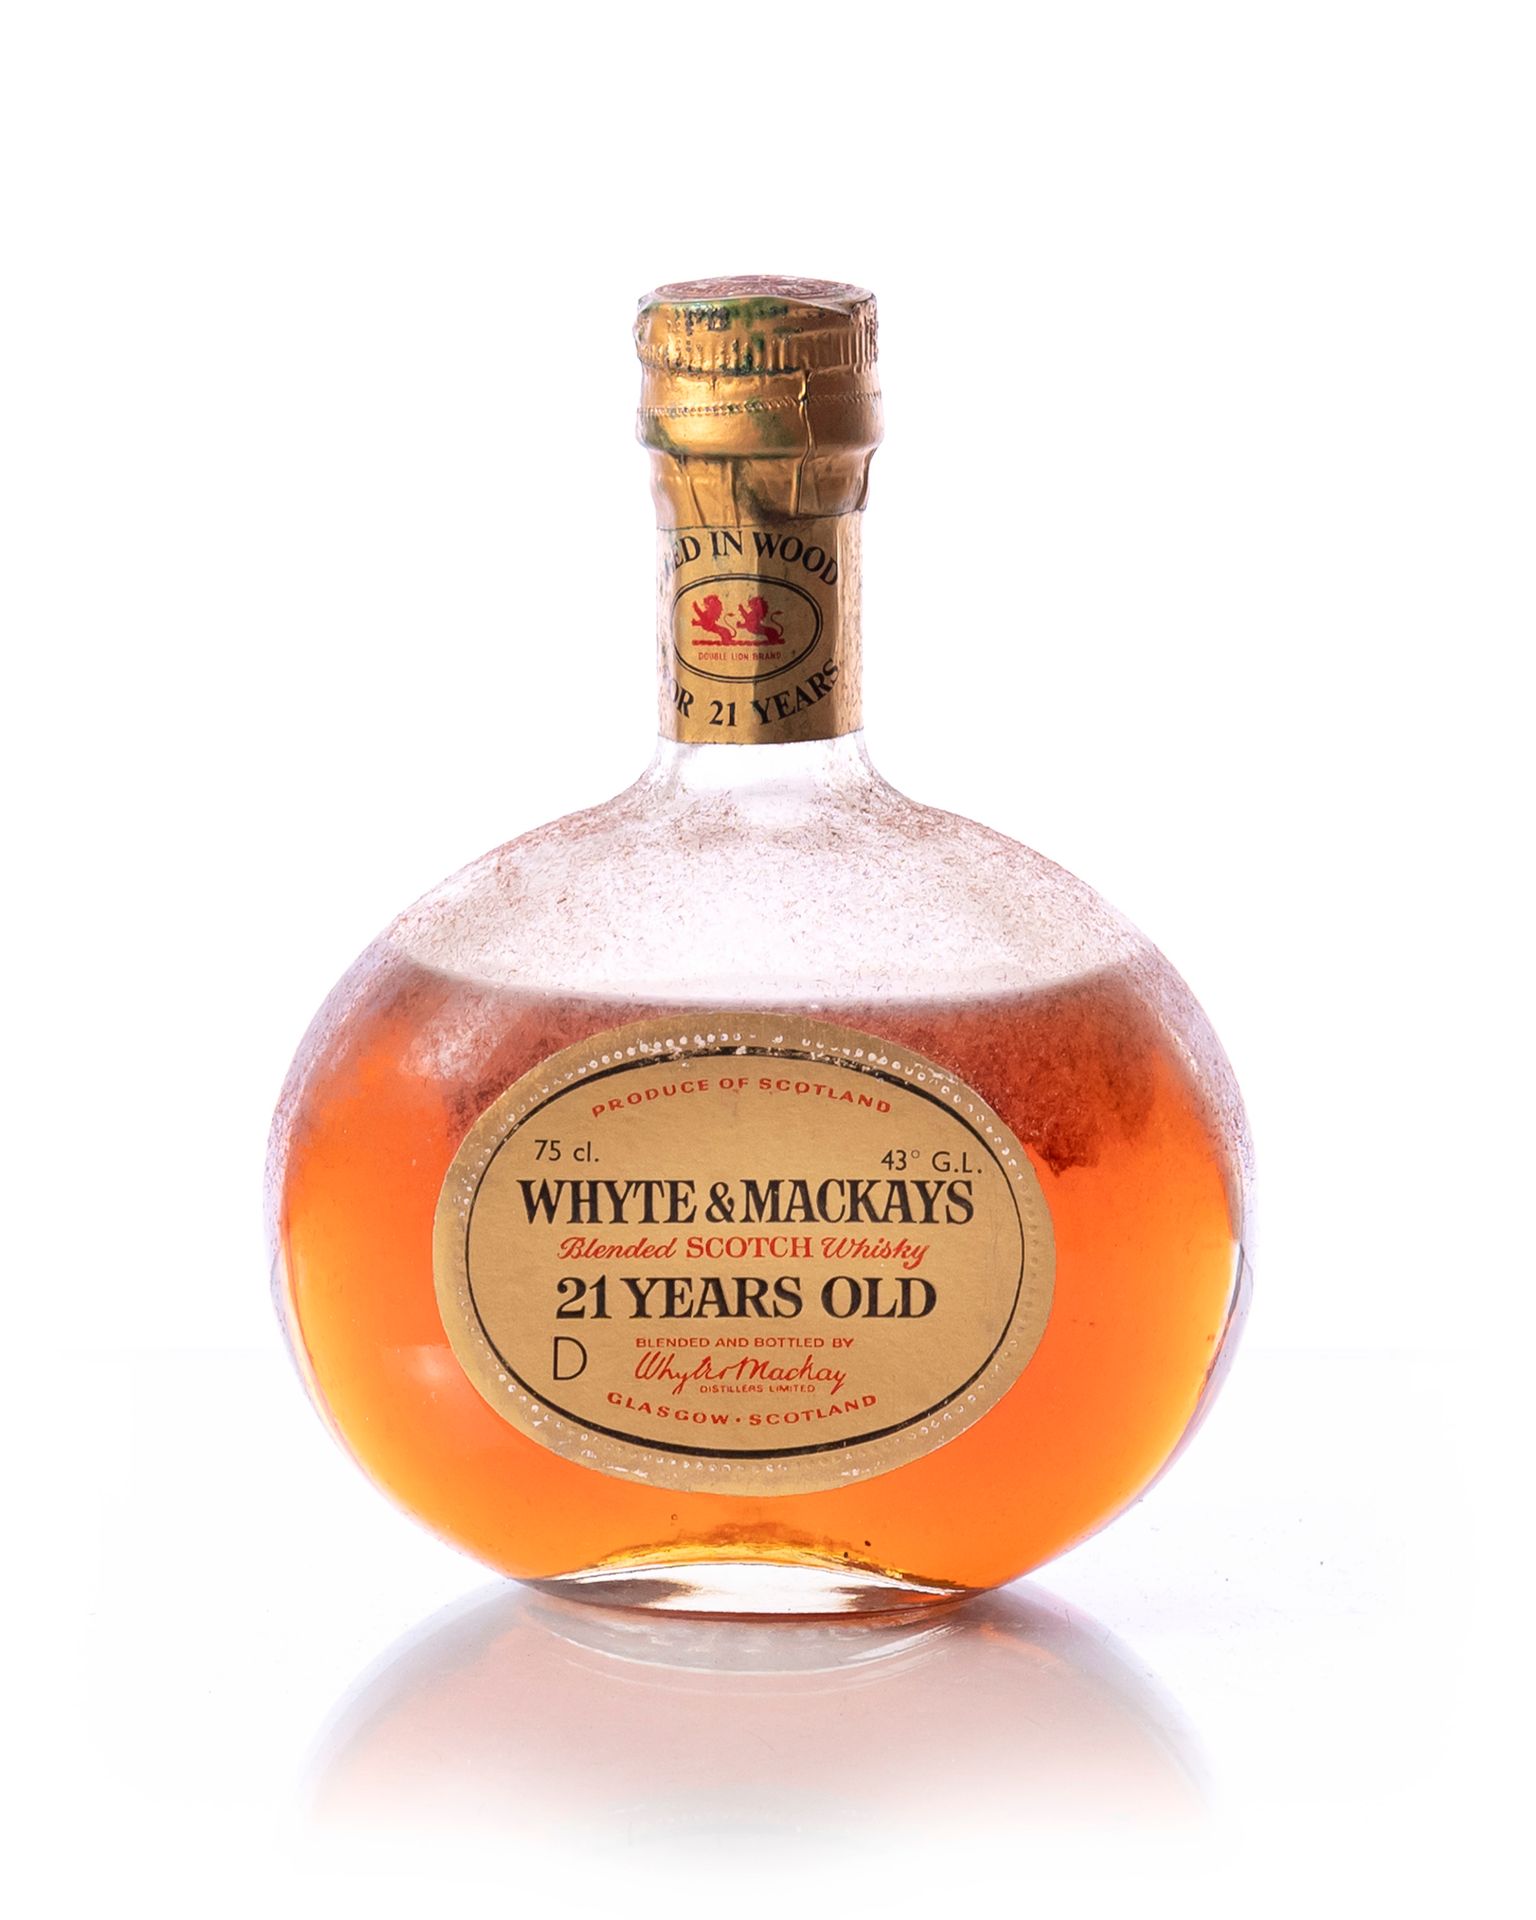 Null 1 bottle (75 cl. - 43°) SCOTCH WHISKY WHYTE MACKAYS 21 years
Year : NM
Labe&hellip;